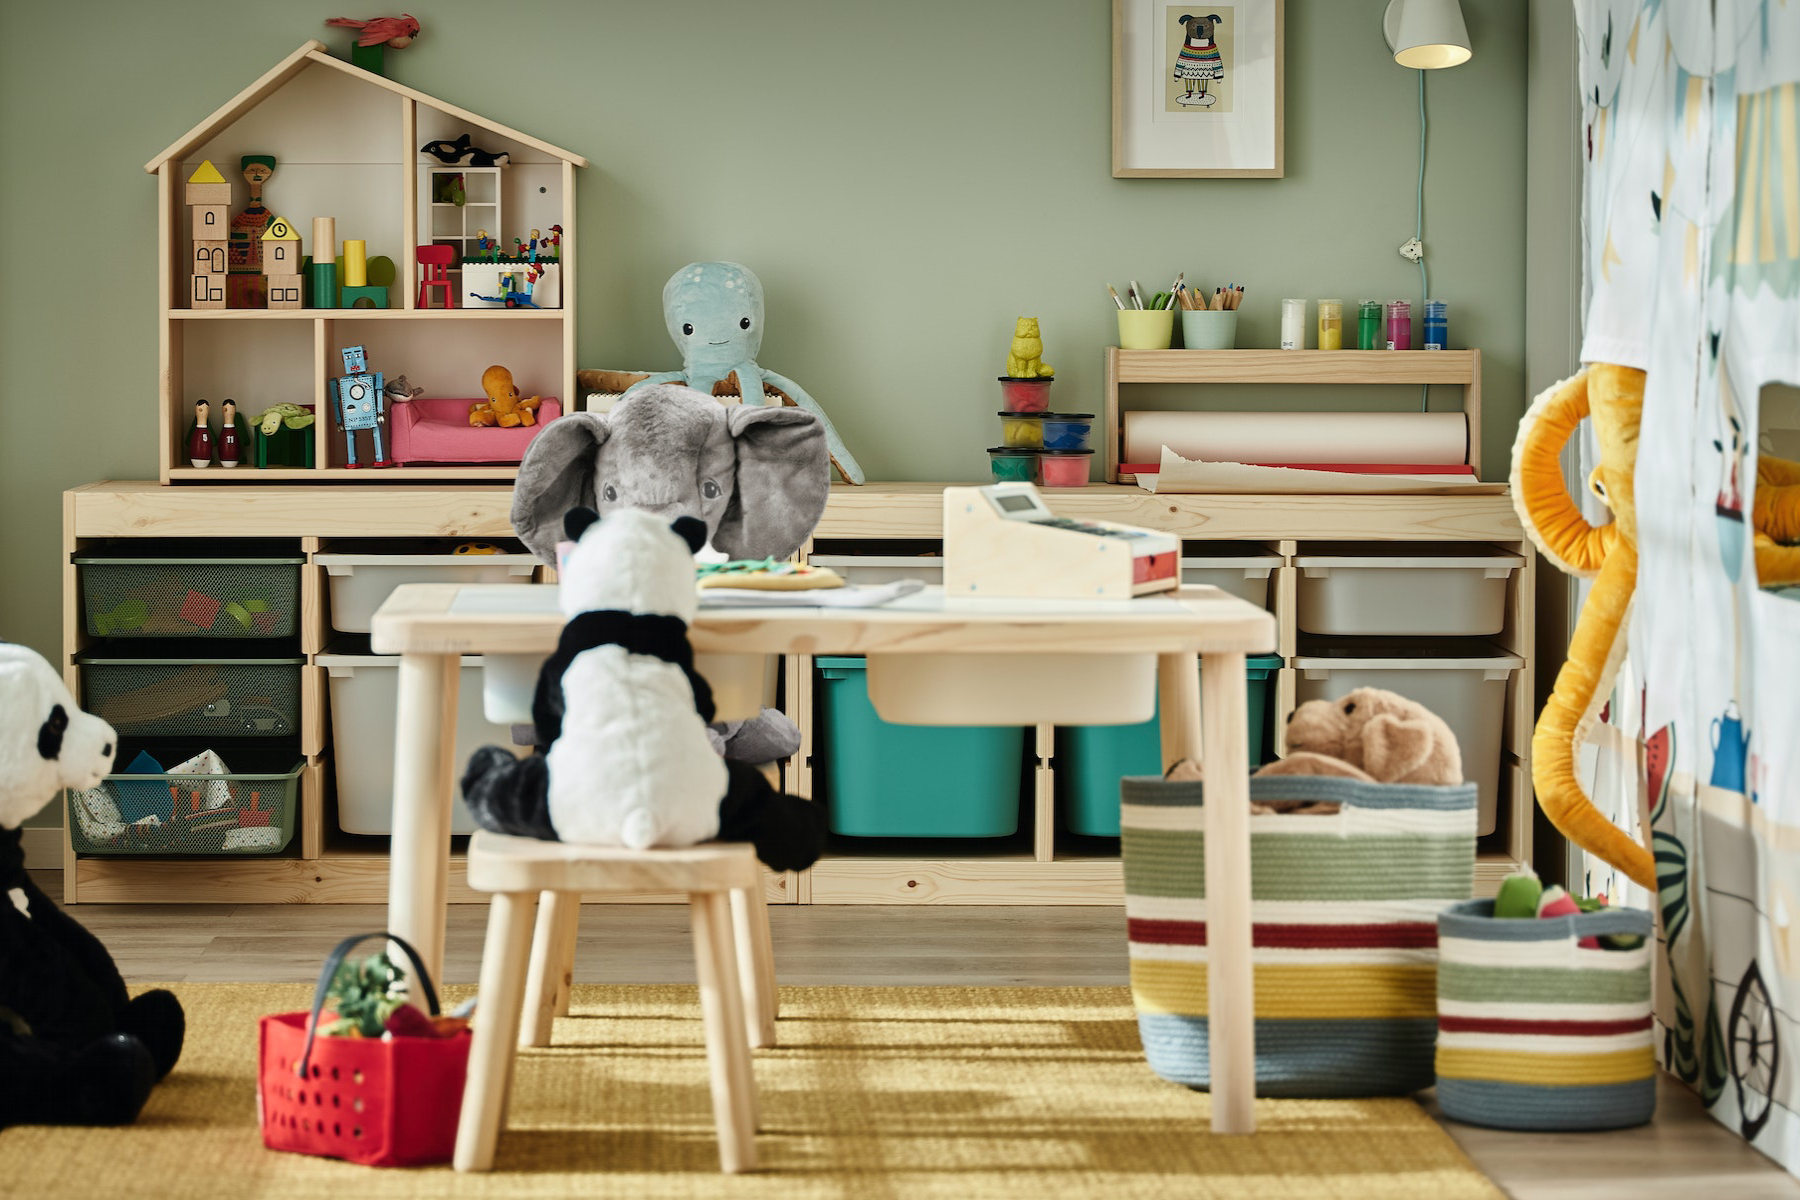 IKEA - How to encourage play in the children’s room